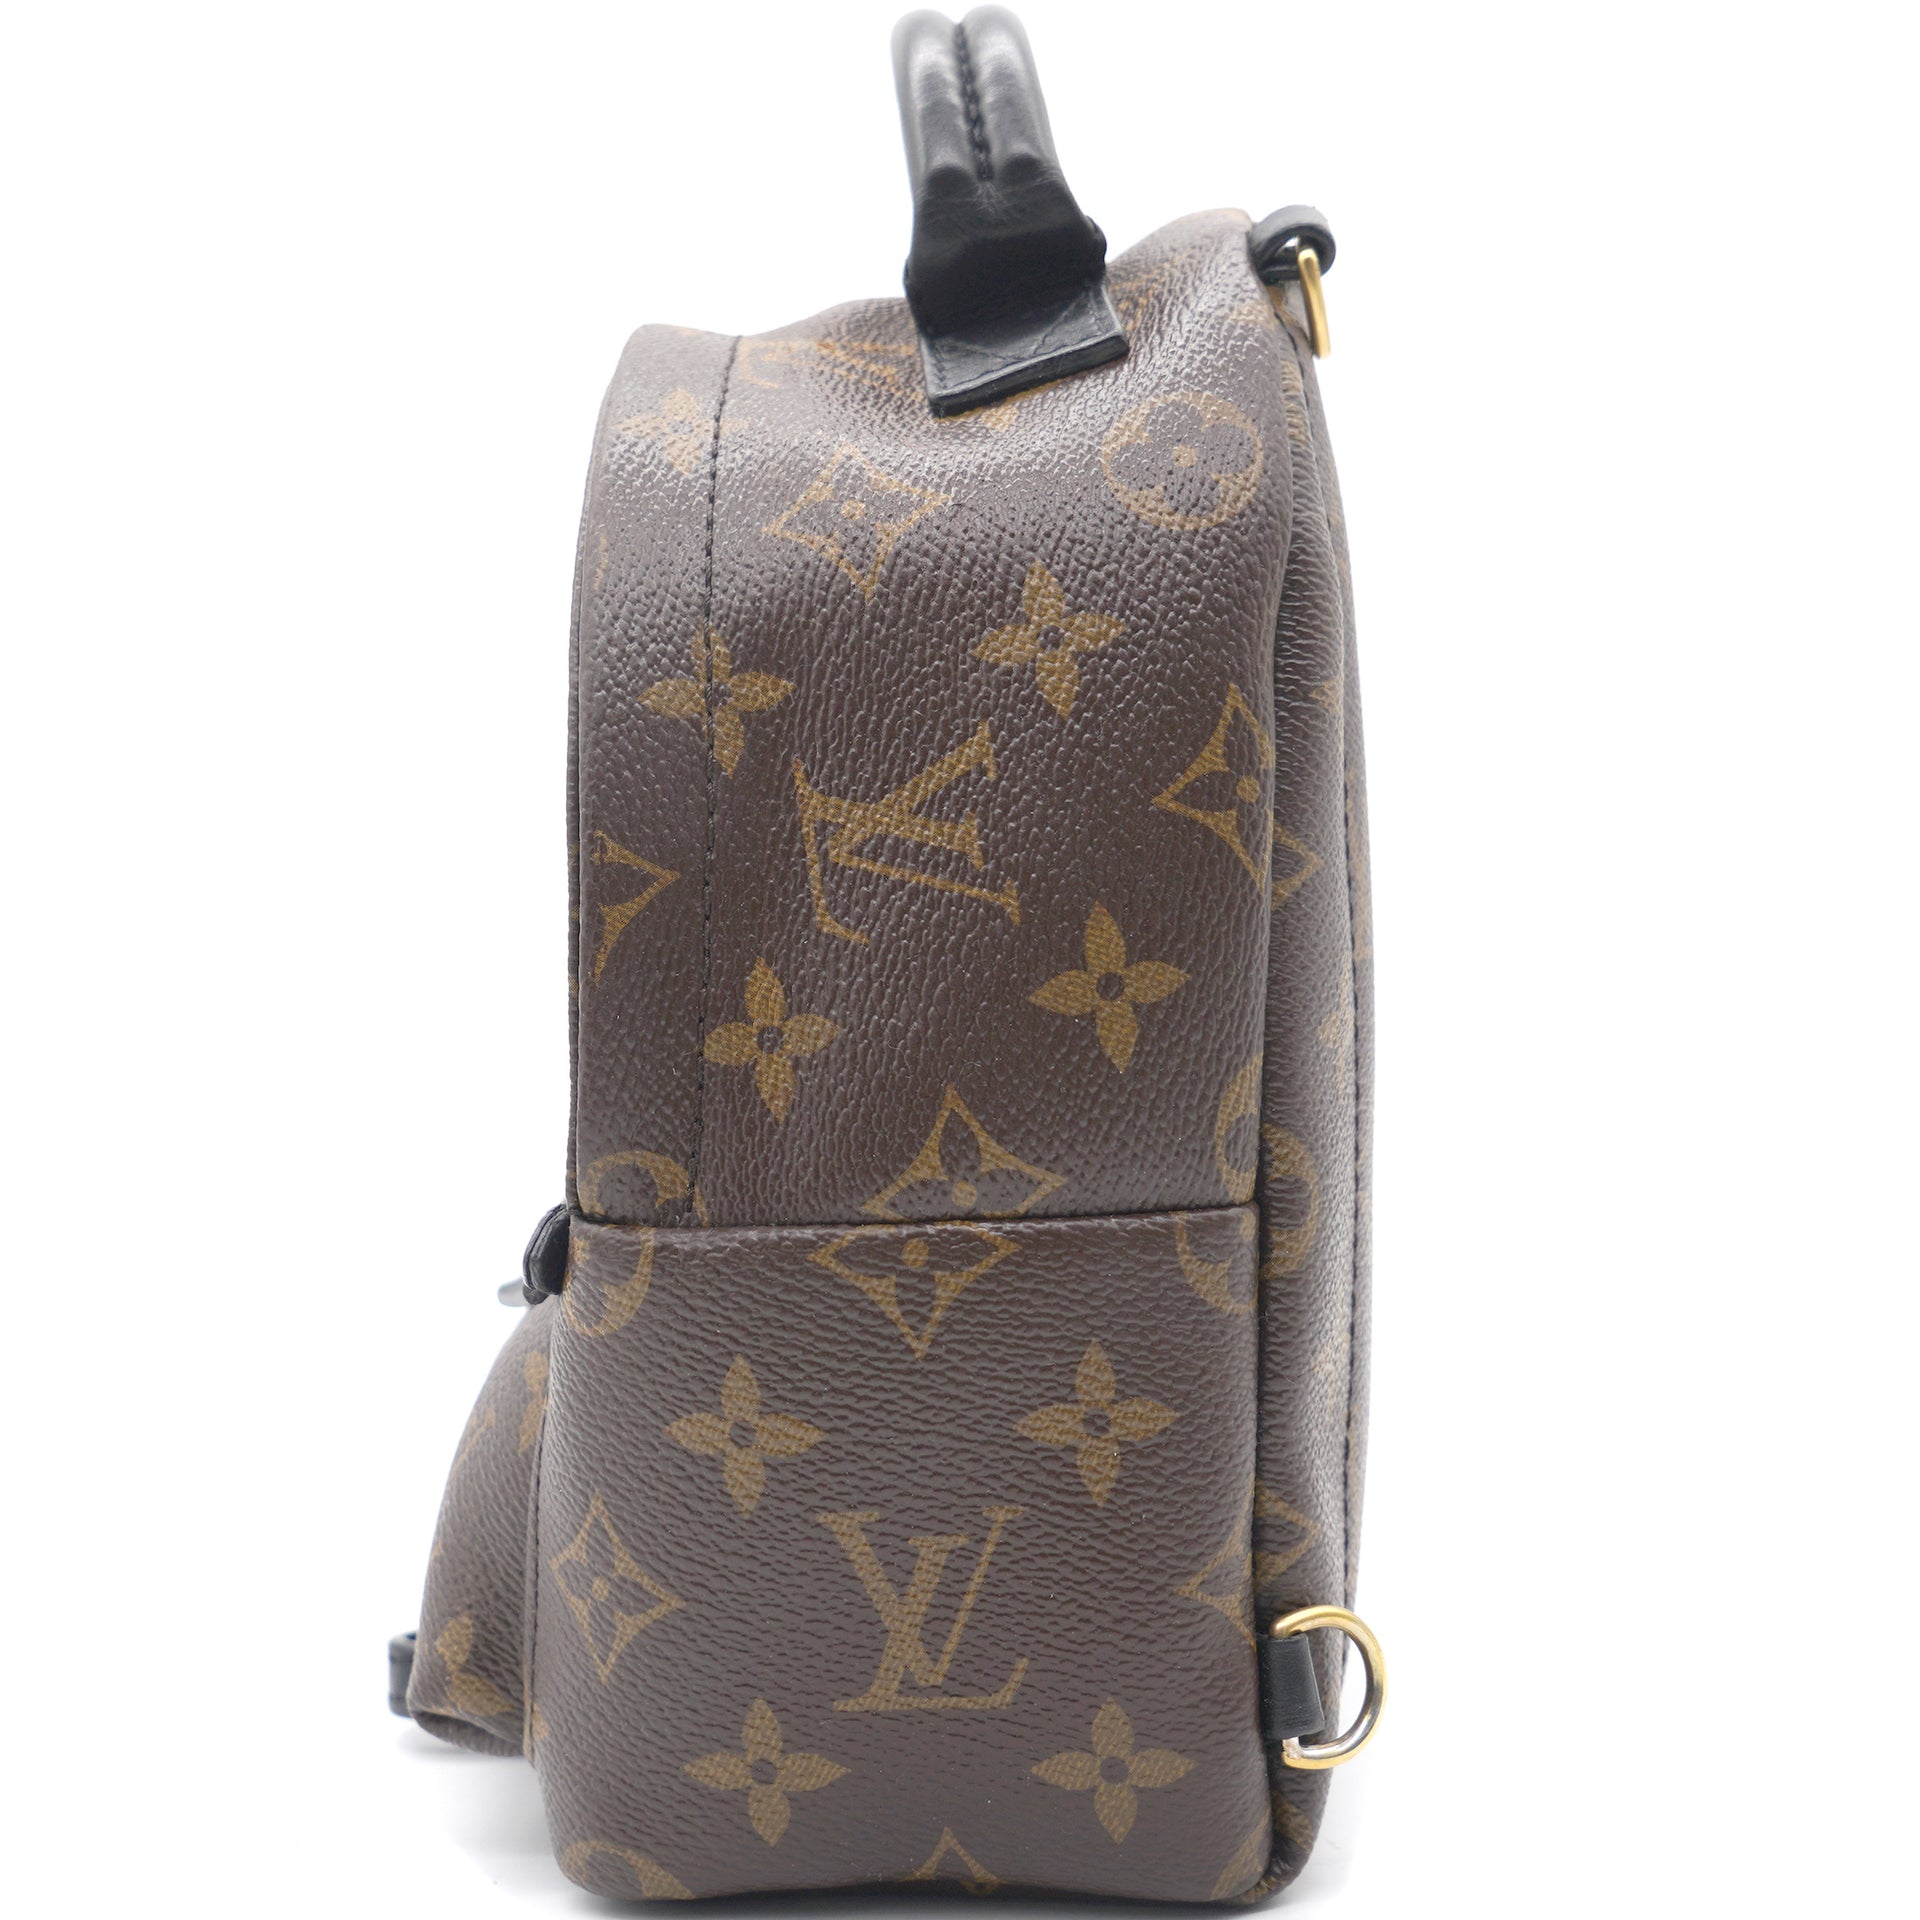 Front side   Prada backpack, Louis  vuitton backpack, Louis vuitton